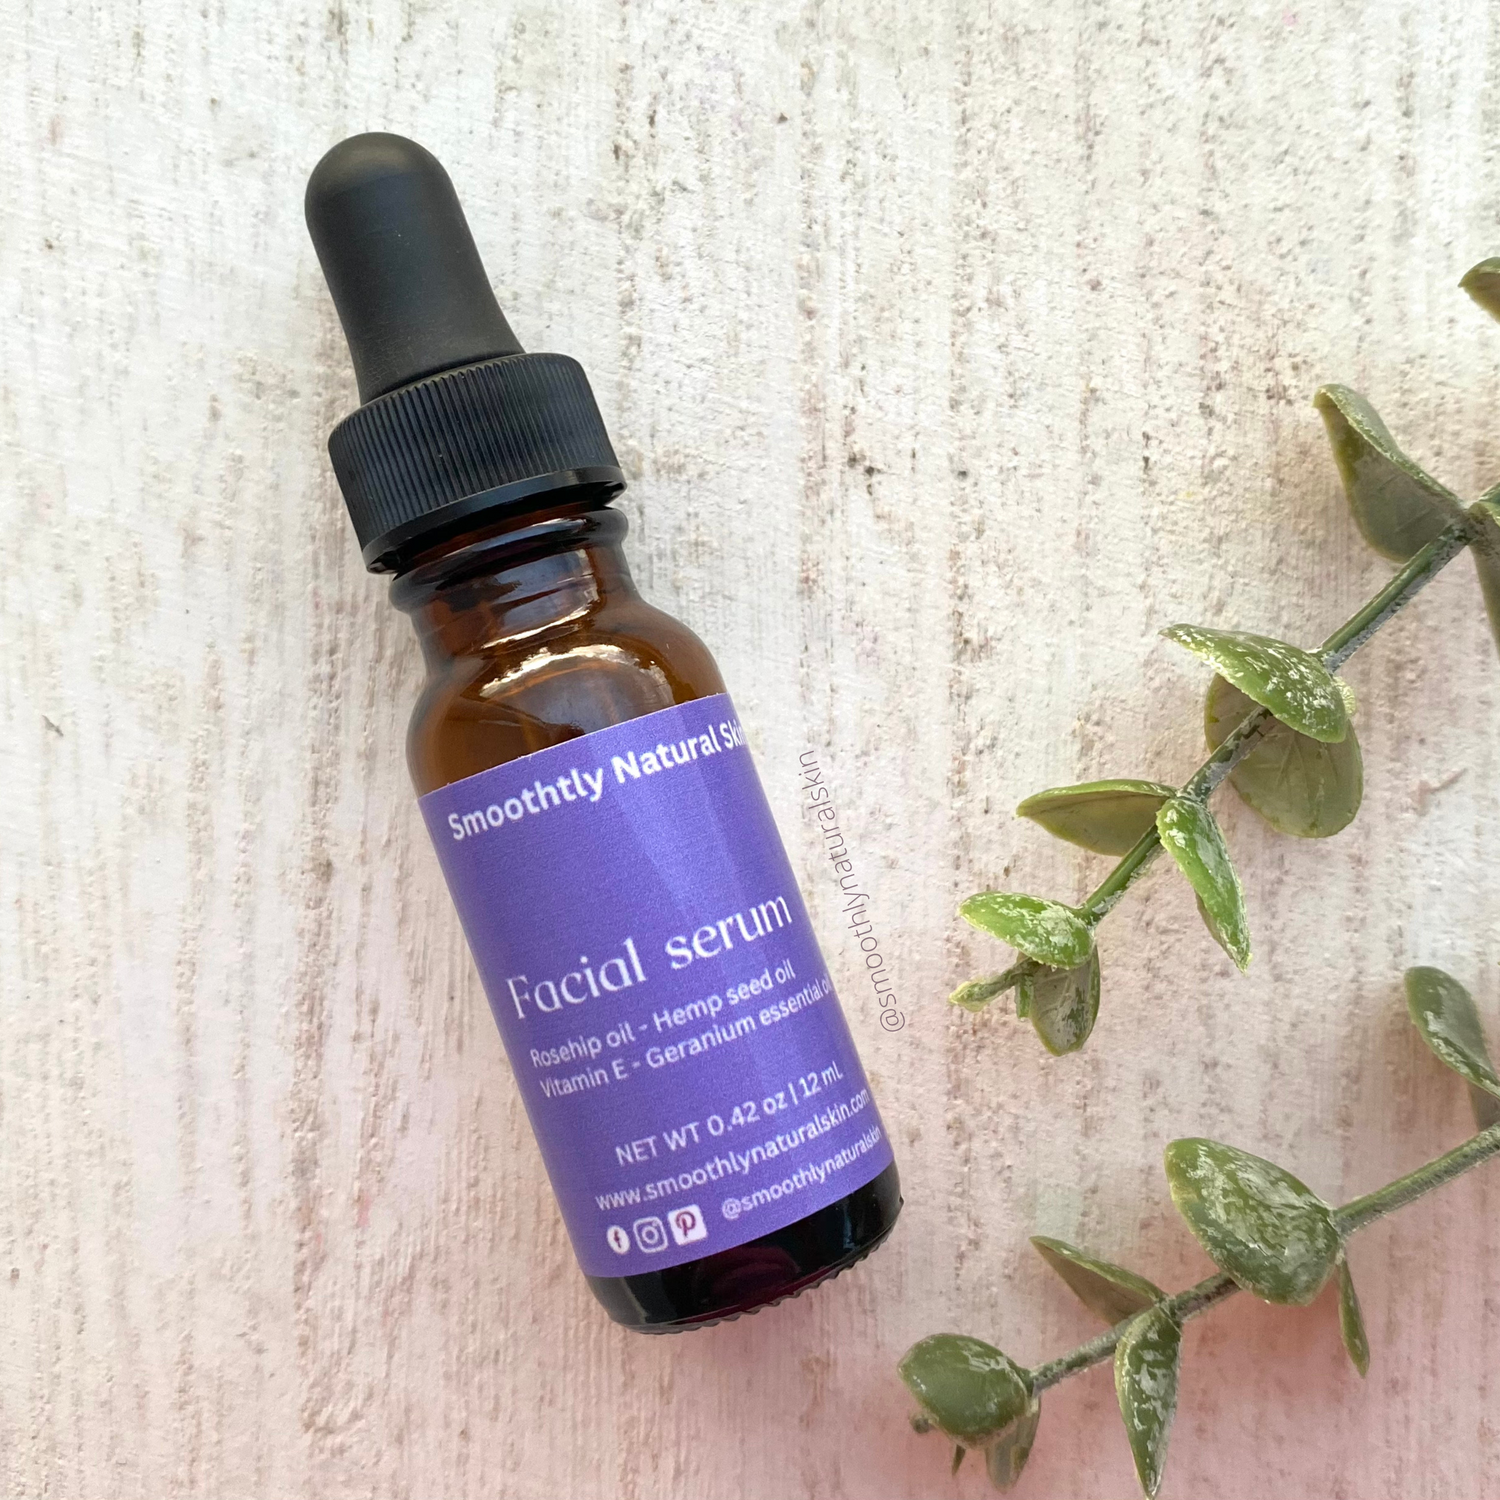 Our facial serum is great for all skin types including sensitive skin. This face serum has a lightweight that absorbs quickly into the skin. Wake up each morning with a soft and smooth skin. Our facial serum is packaged in an amber glass bottle with dropper.